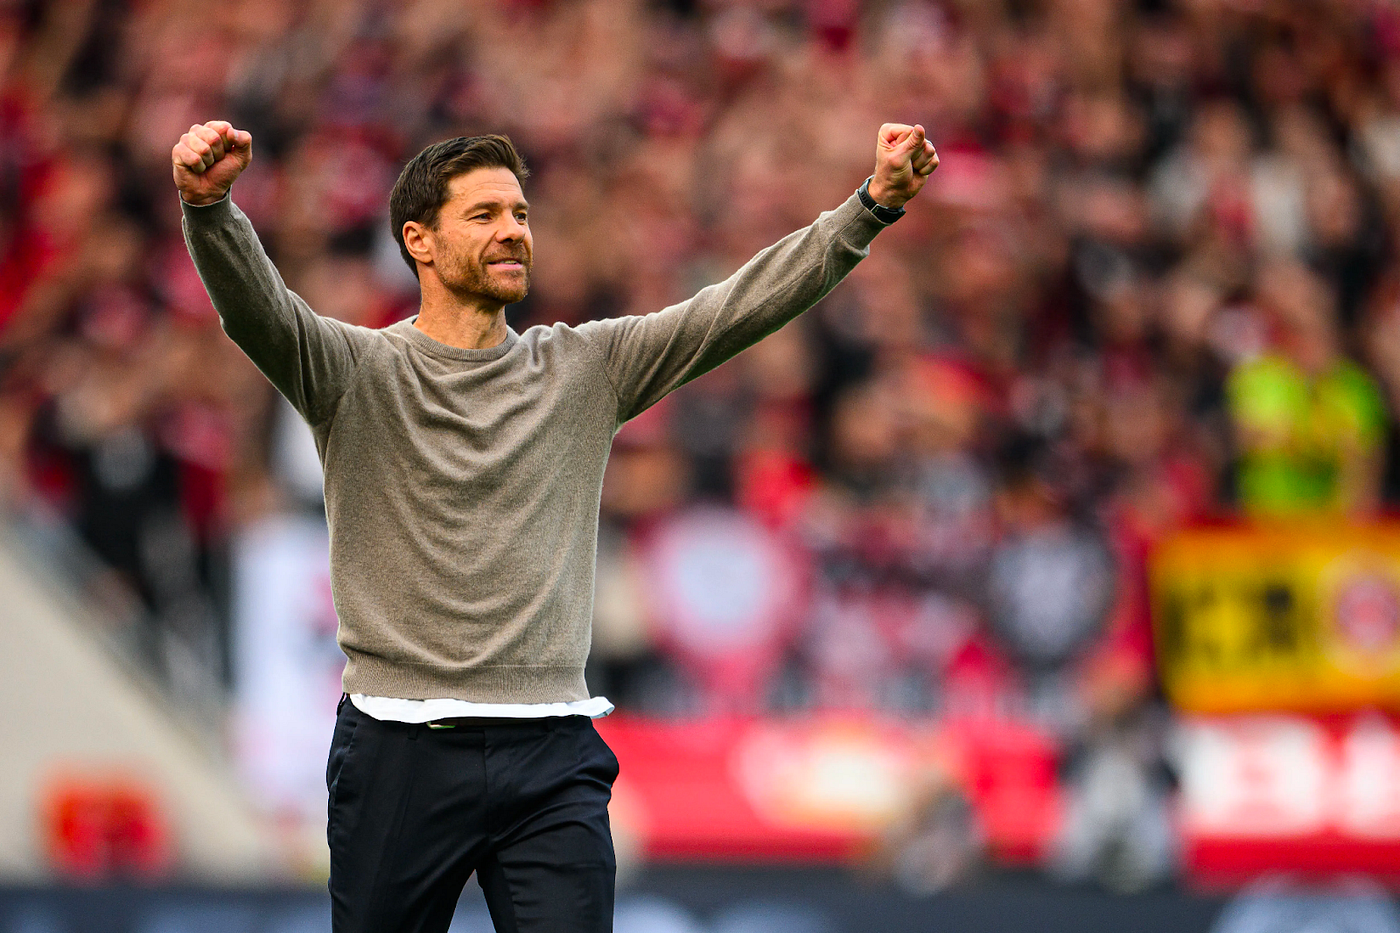 Bayern Munich sporting director's response to Xabi Alonso speculation amid Liverpool links